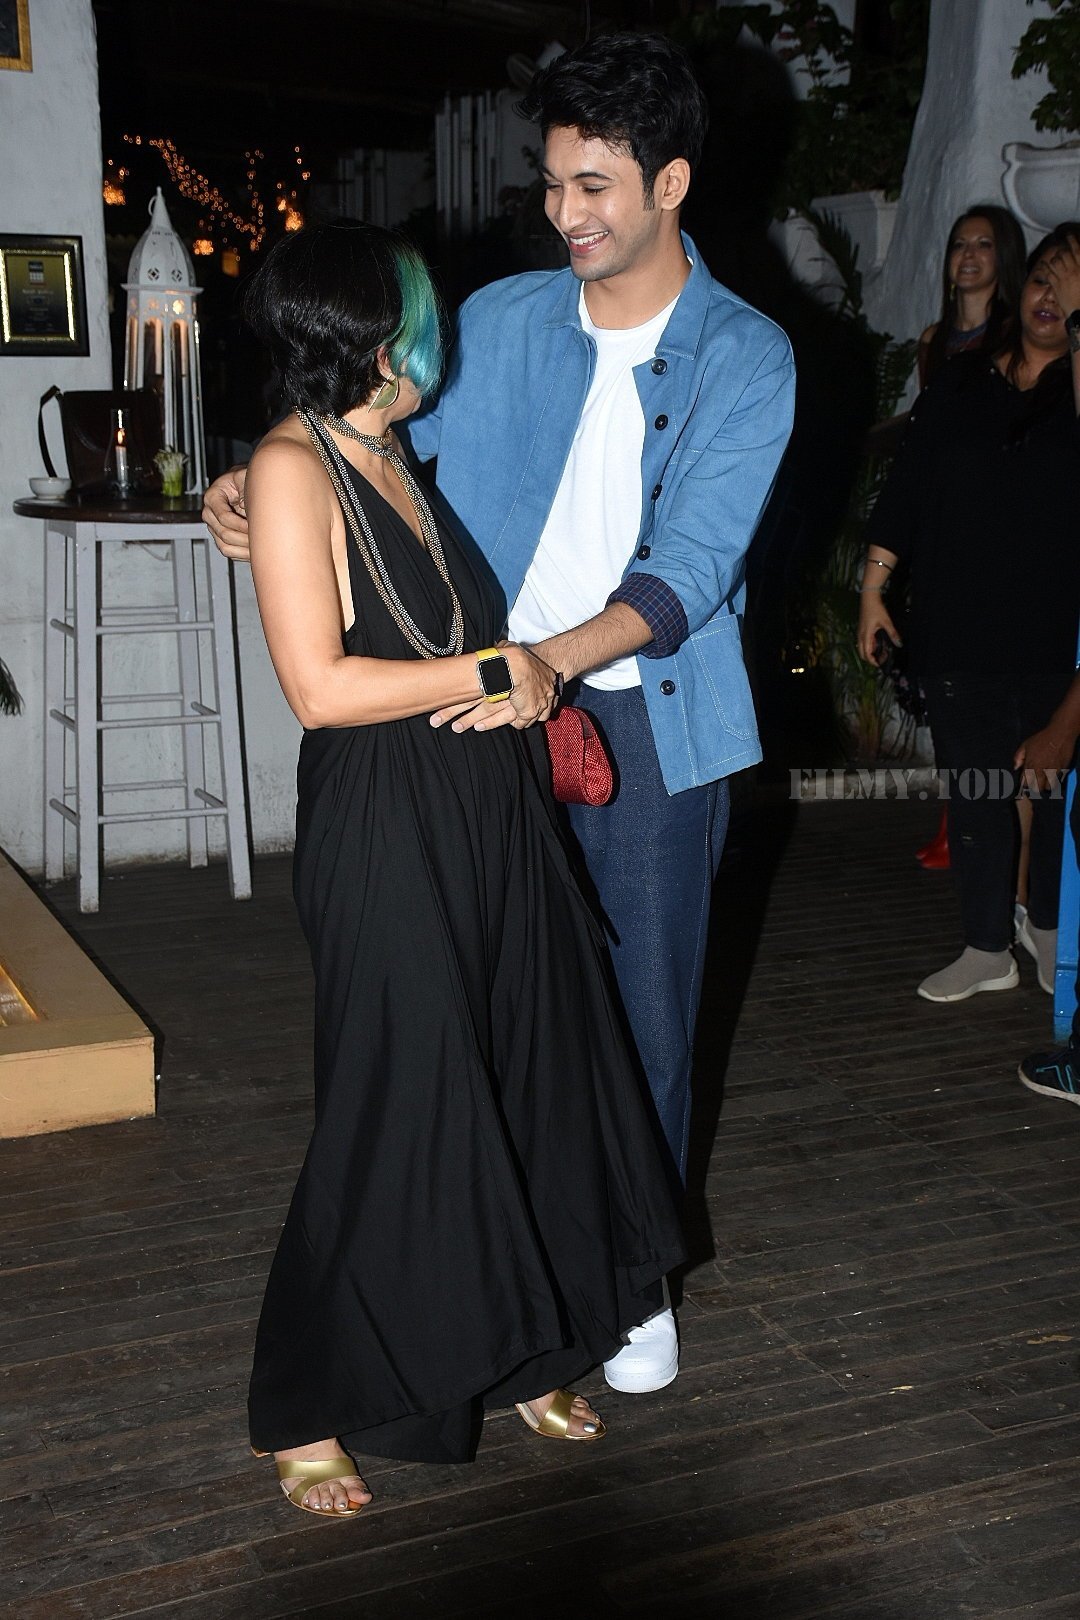 Photos: Wrapup Party Of Film The Sky Is Pink At Olive In Bandra | Picture 1653243